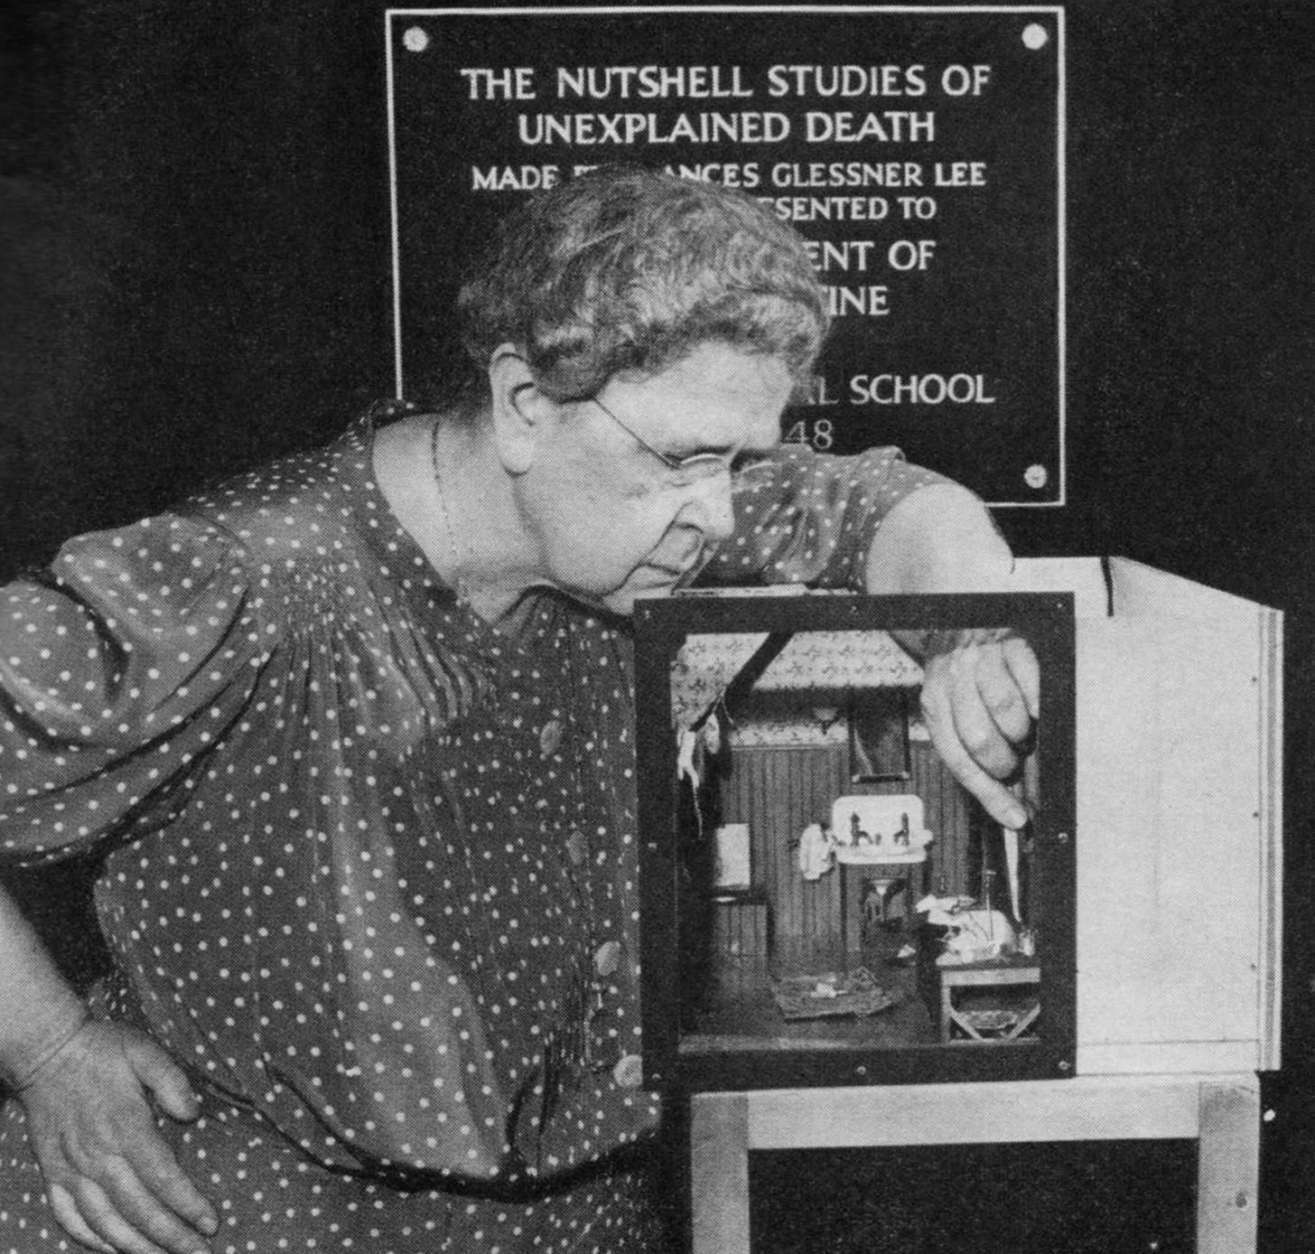 Frances Glessner Lee was a woman in the male-dominated field of forensic science, but she turned to the traditionally-feminine hobby of crafts to help “convict the guilty, clear the innocent, and find the truth in a nutshell.” 

In this photo: Frances Glessner Lee with her Nutshell diorama, Dark Bathroom. (Image courtesy Glessner House Museum, Chicago, IL, via the Renwick Gallery)